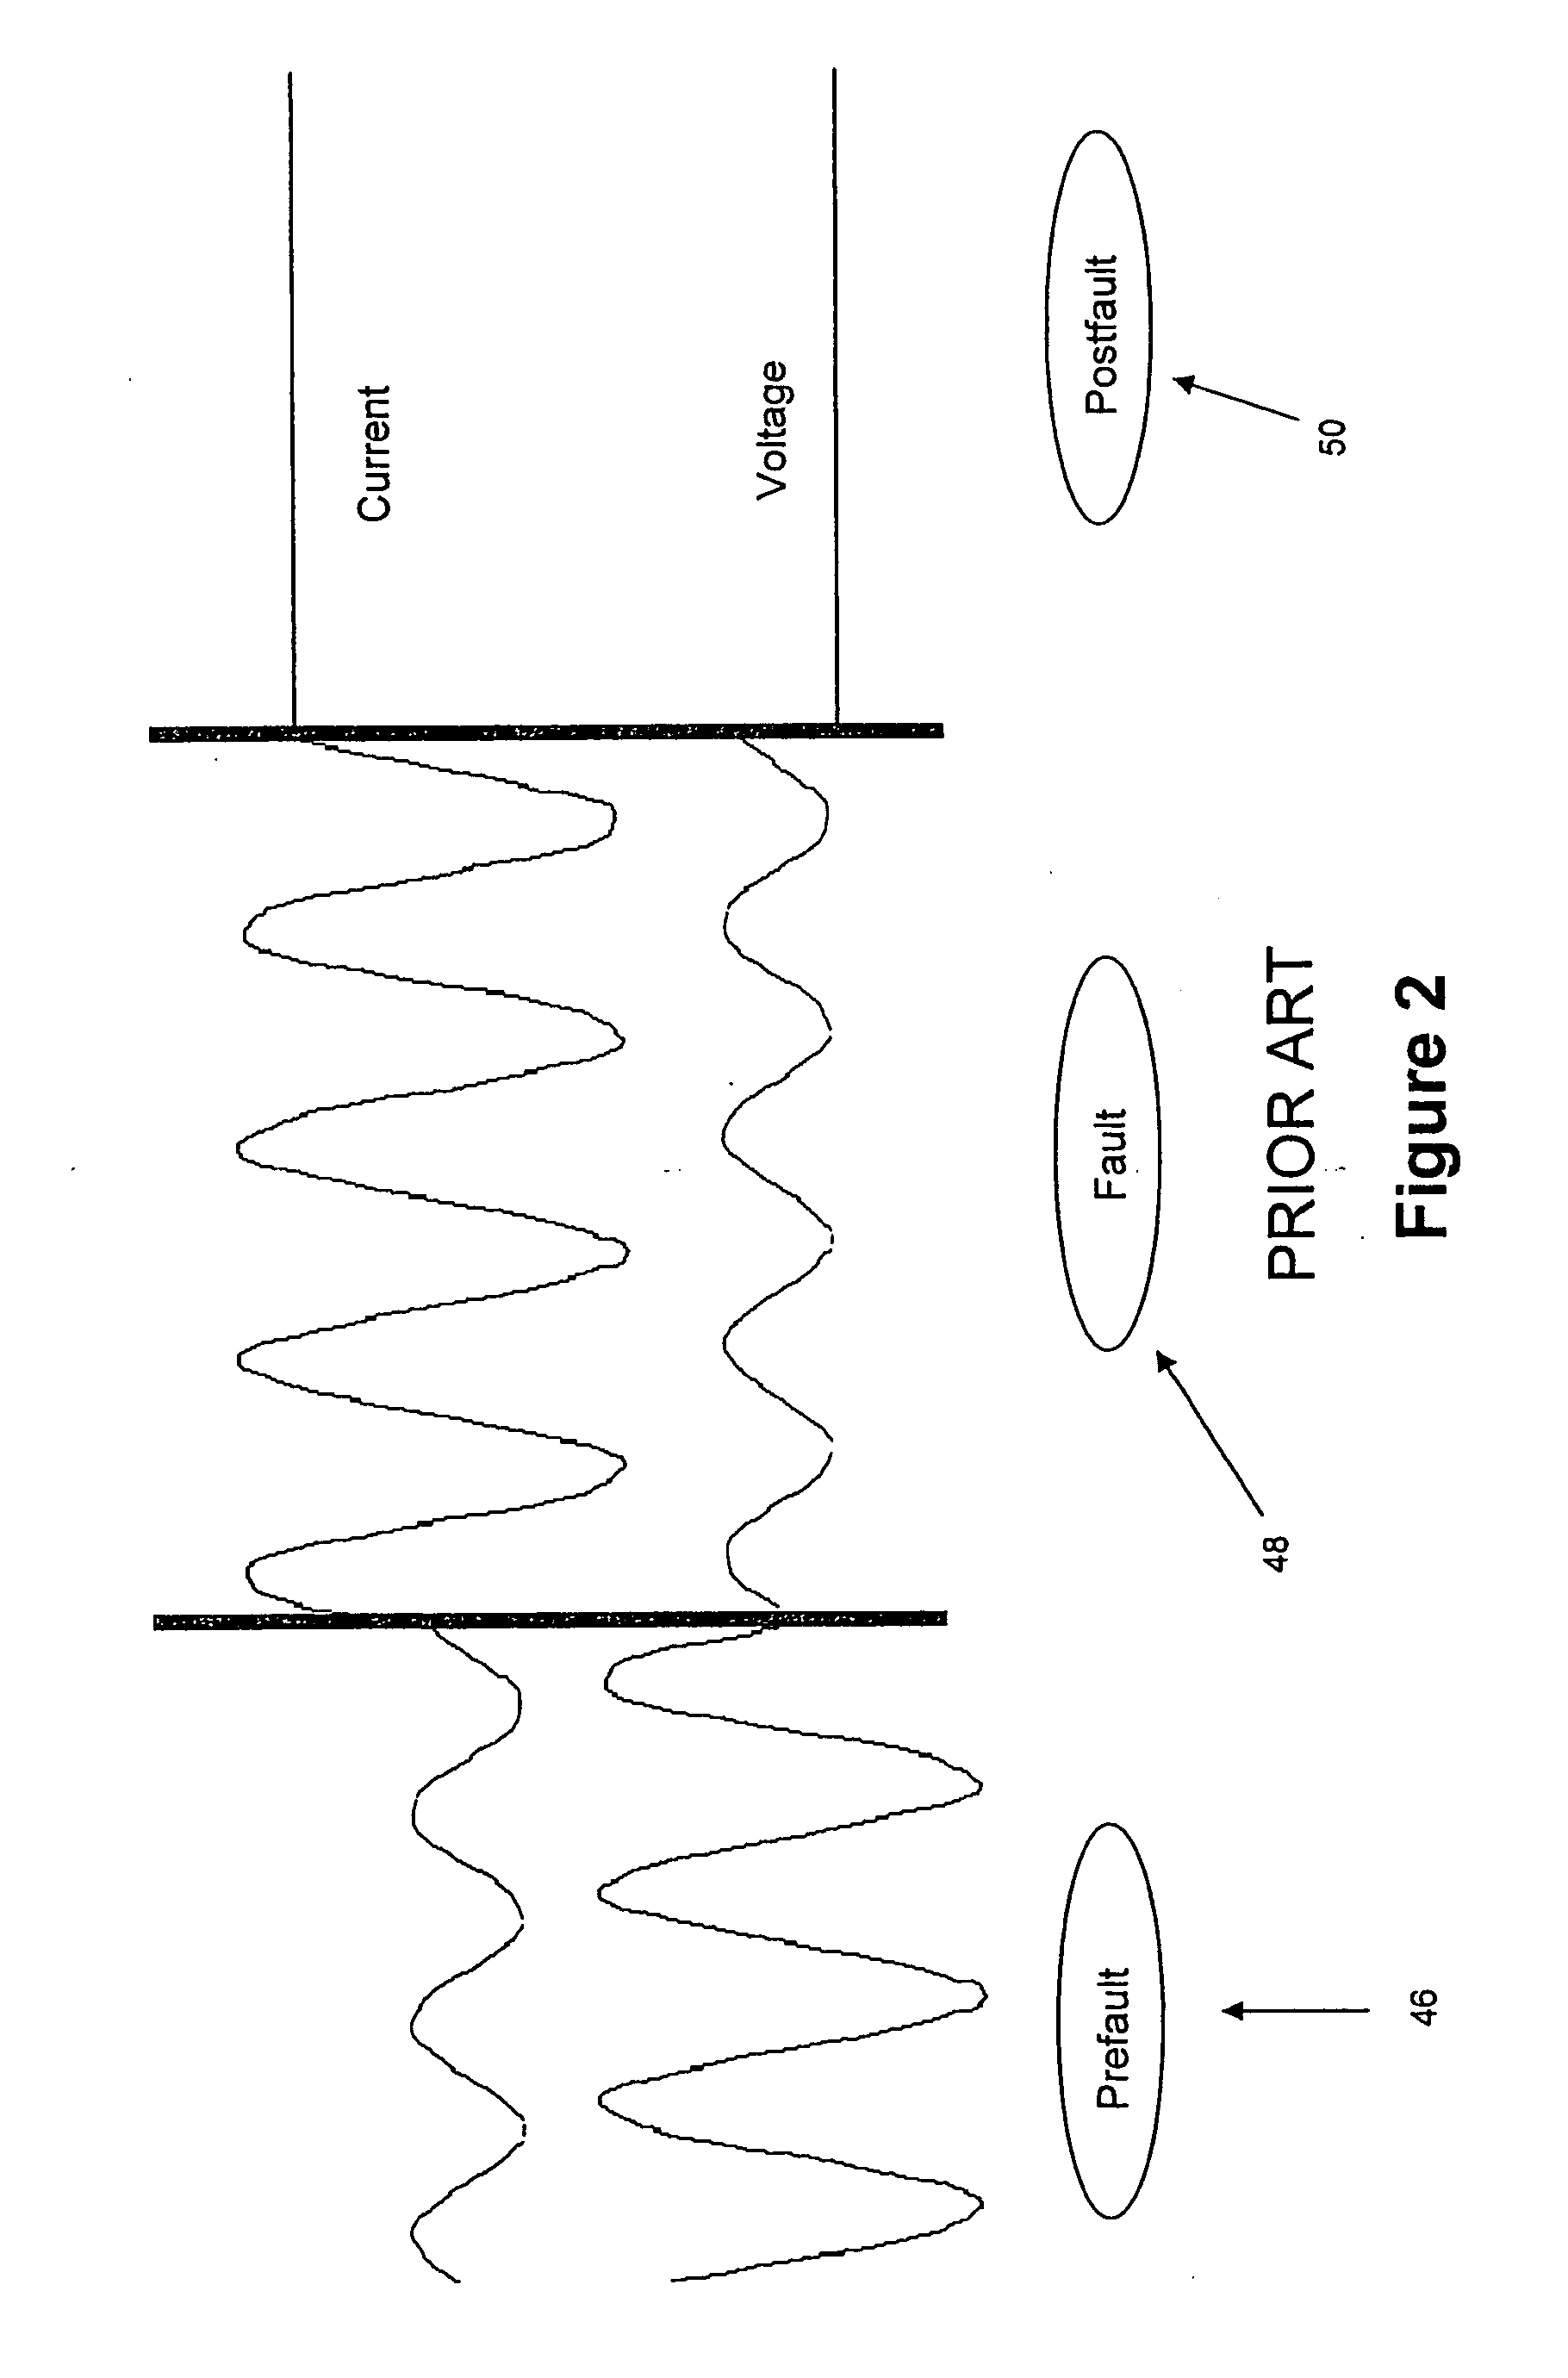 System and method for performing automated testing of protective relay equipment